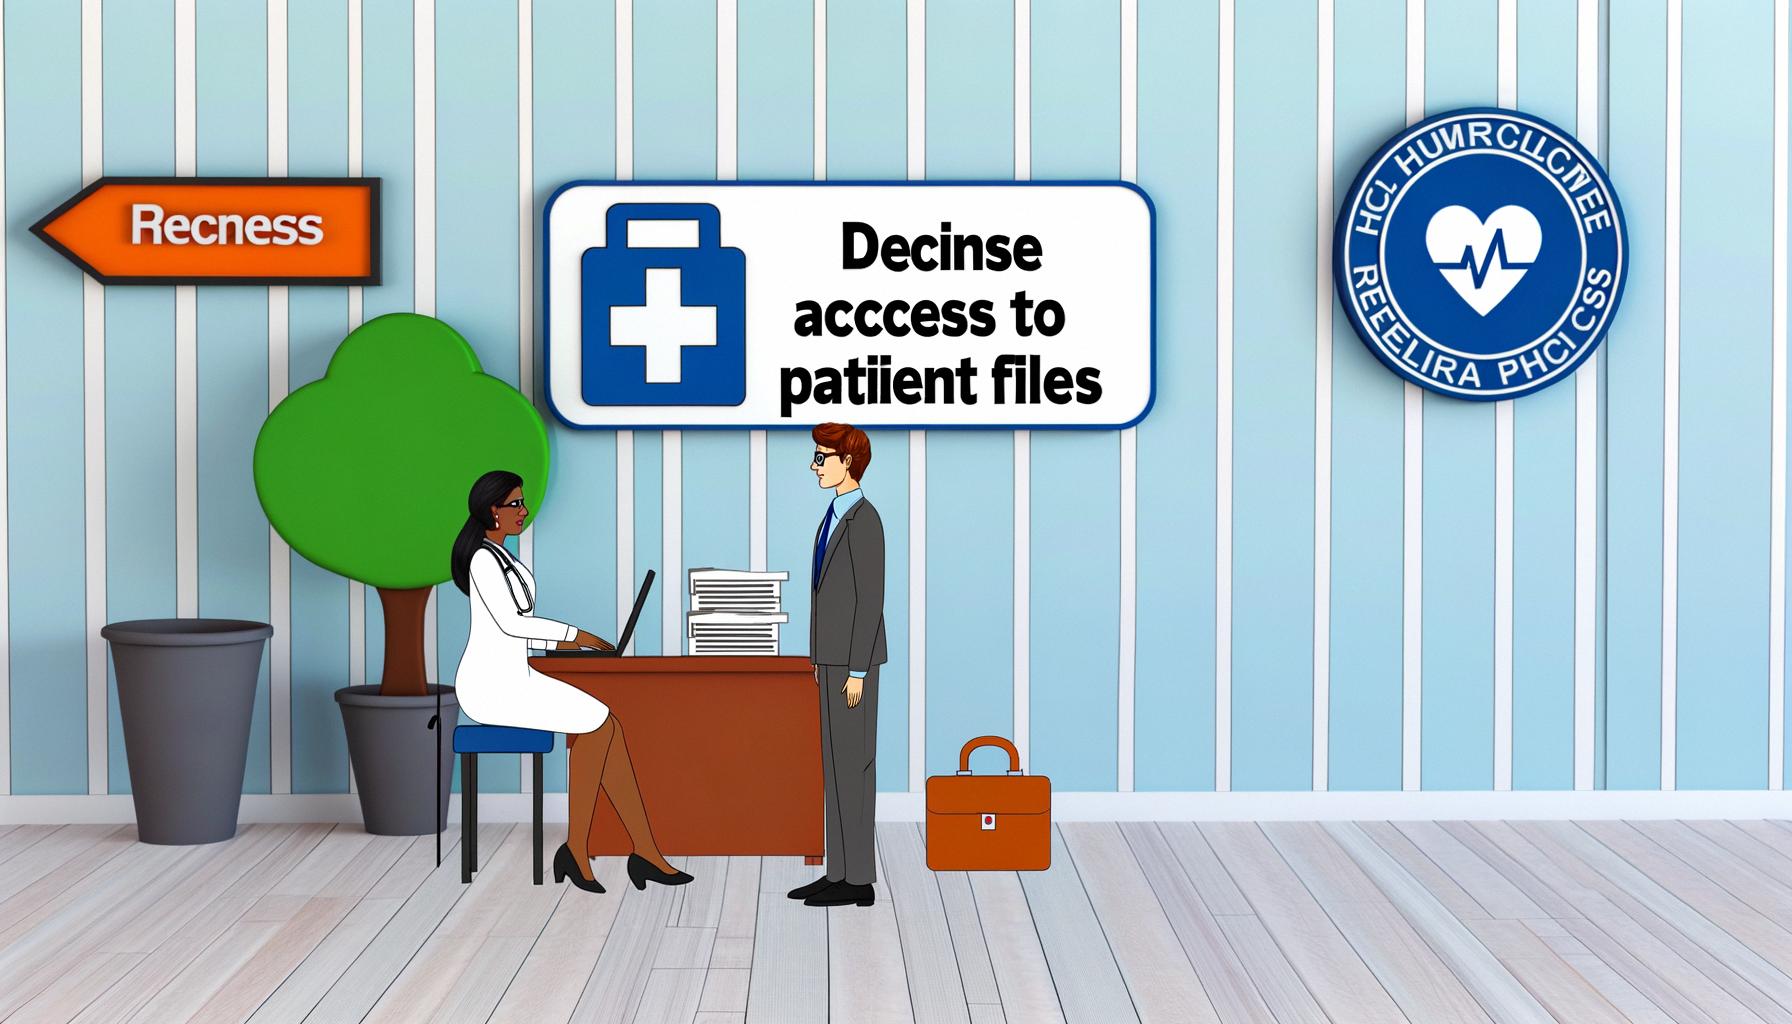 HHS penalizes healthcare providers obstructing patient access to electronic health information.